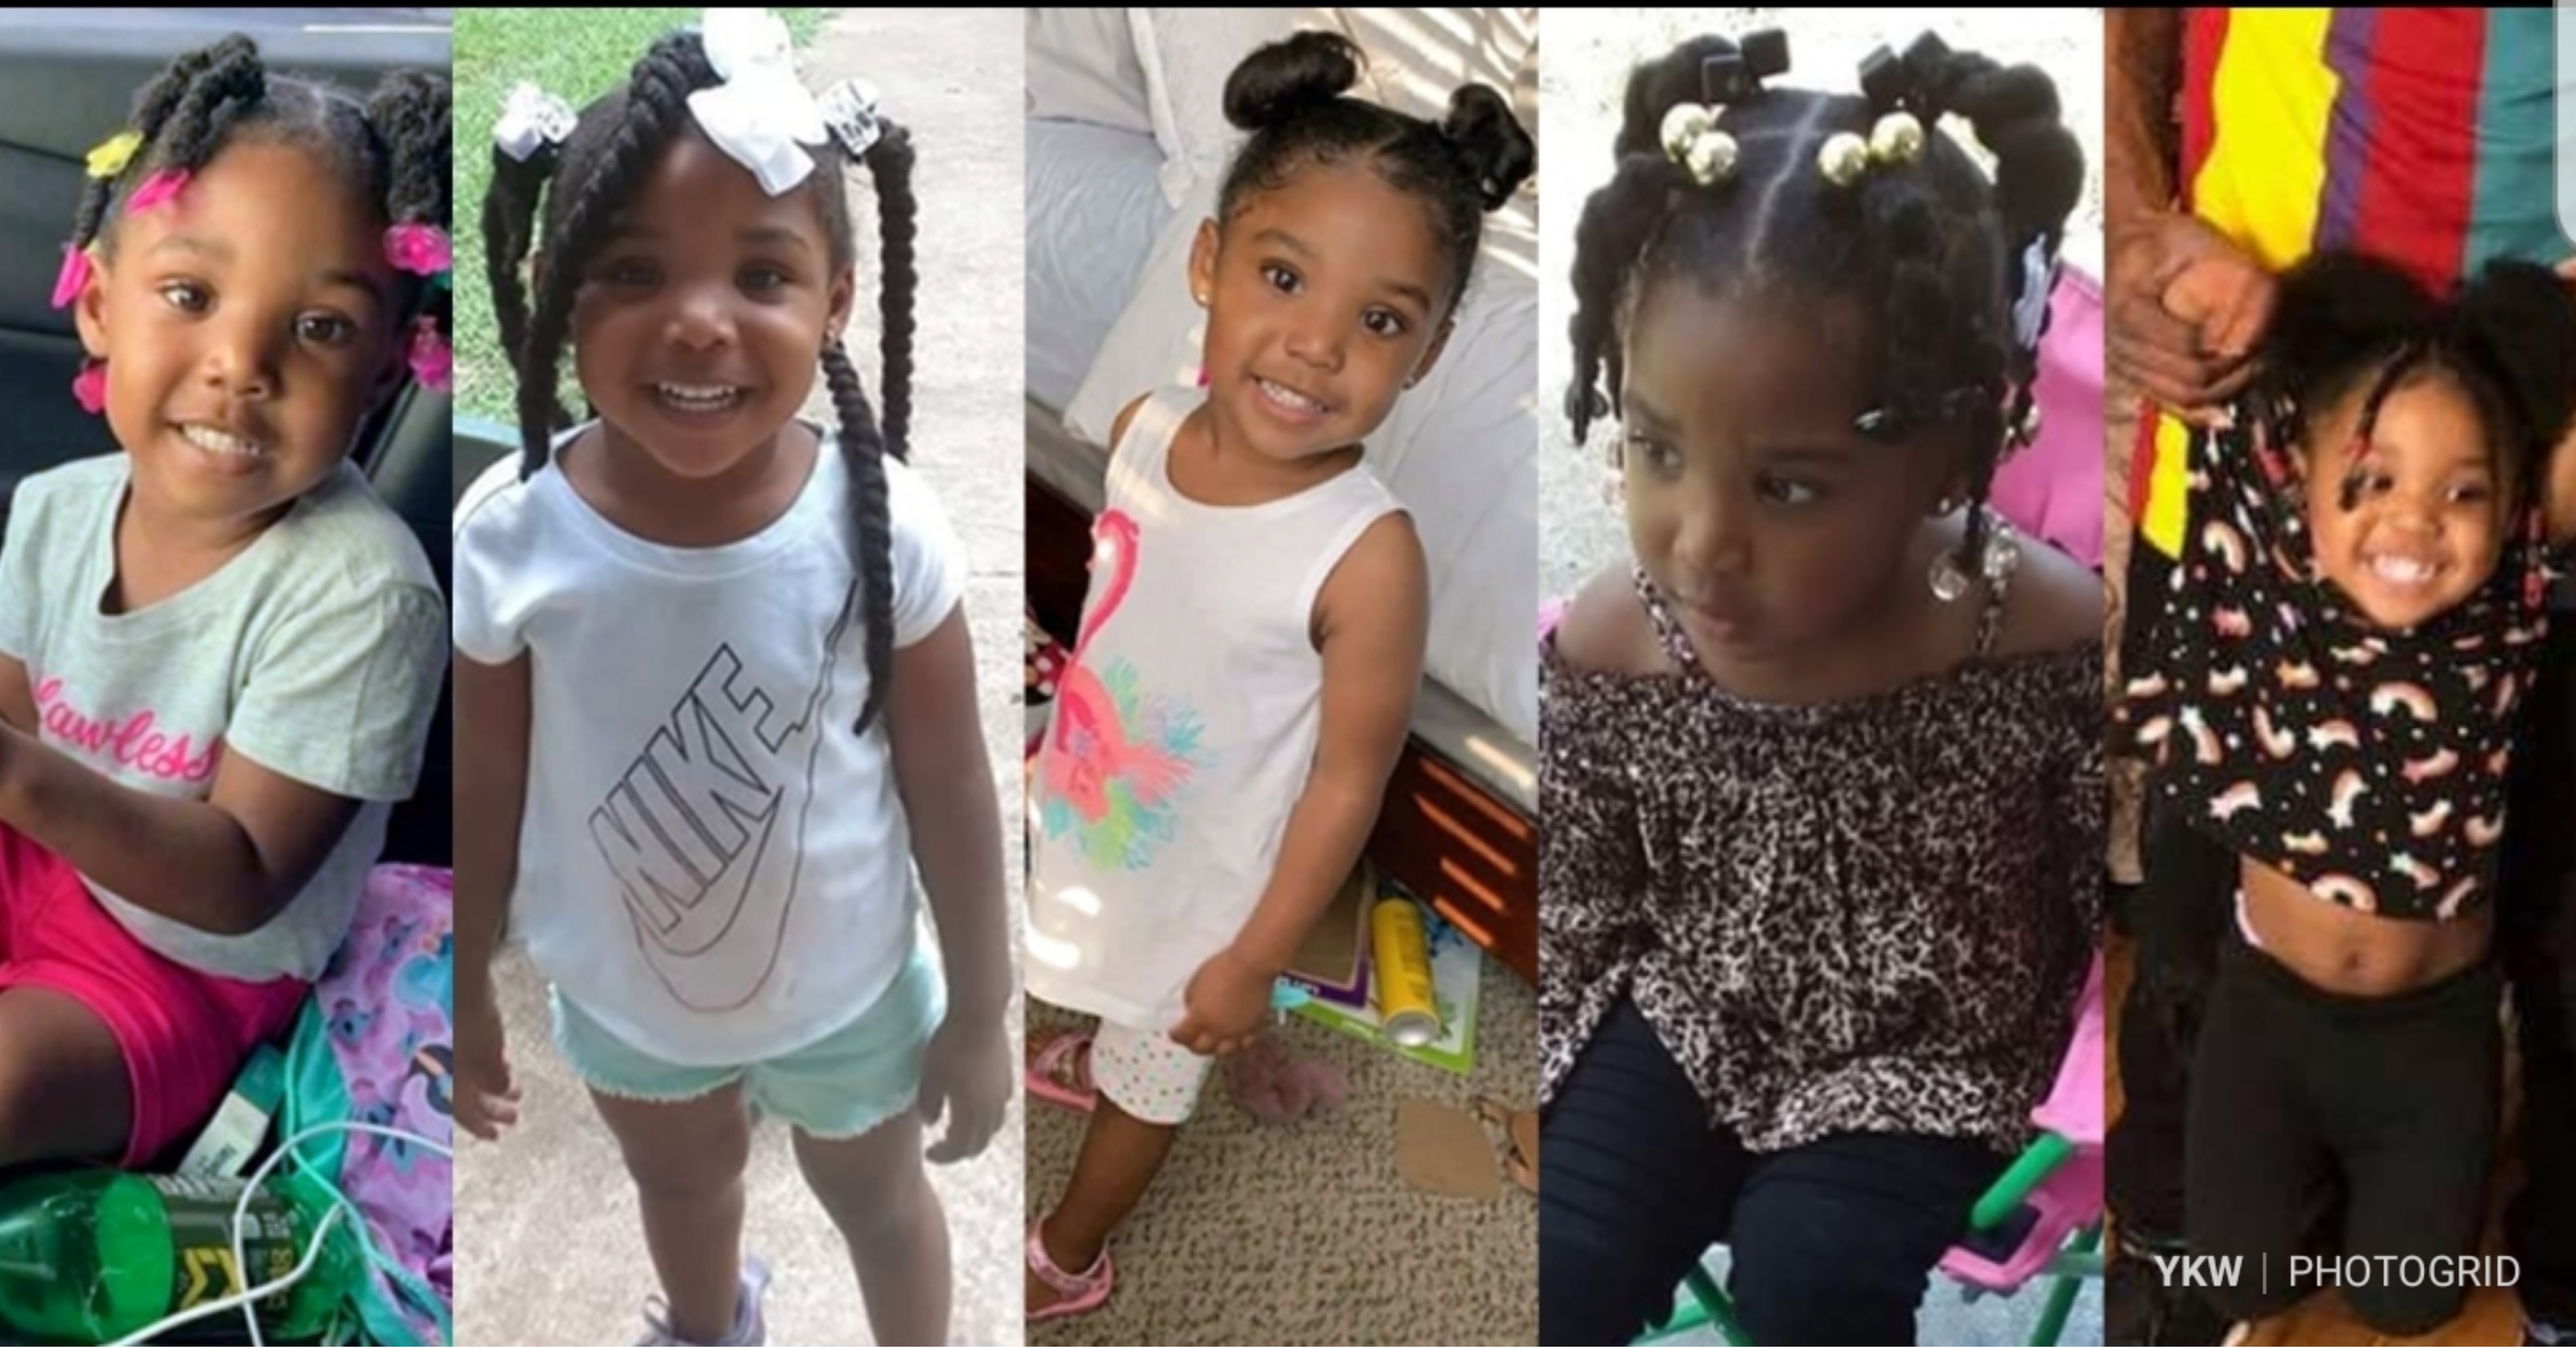 3-Year Old Girl Abducted From Birthday Party Still Missing, 2 Persons Of Interest In Custody